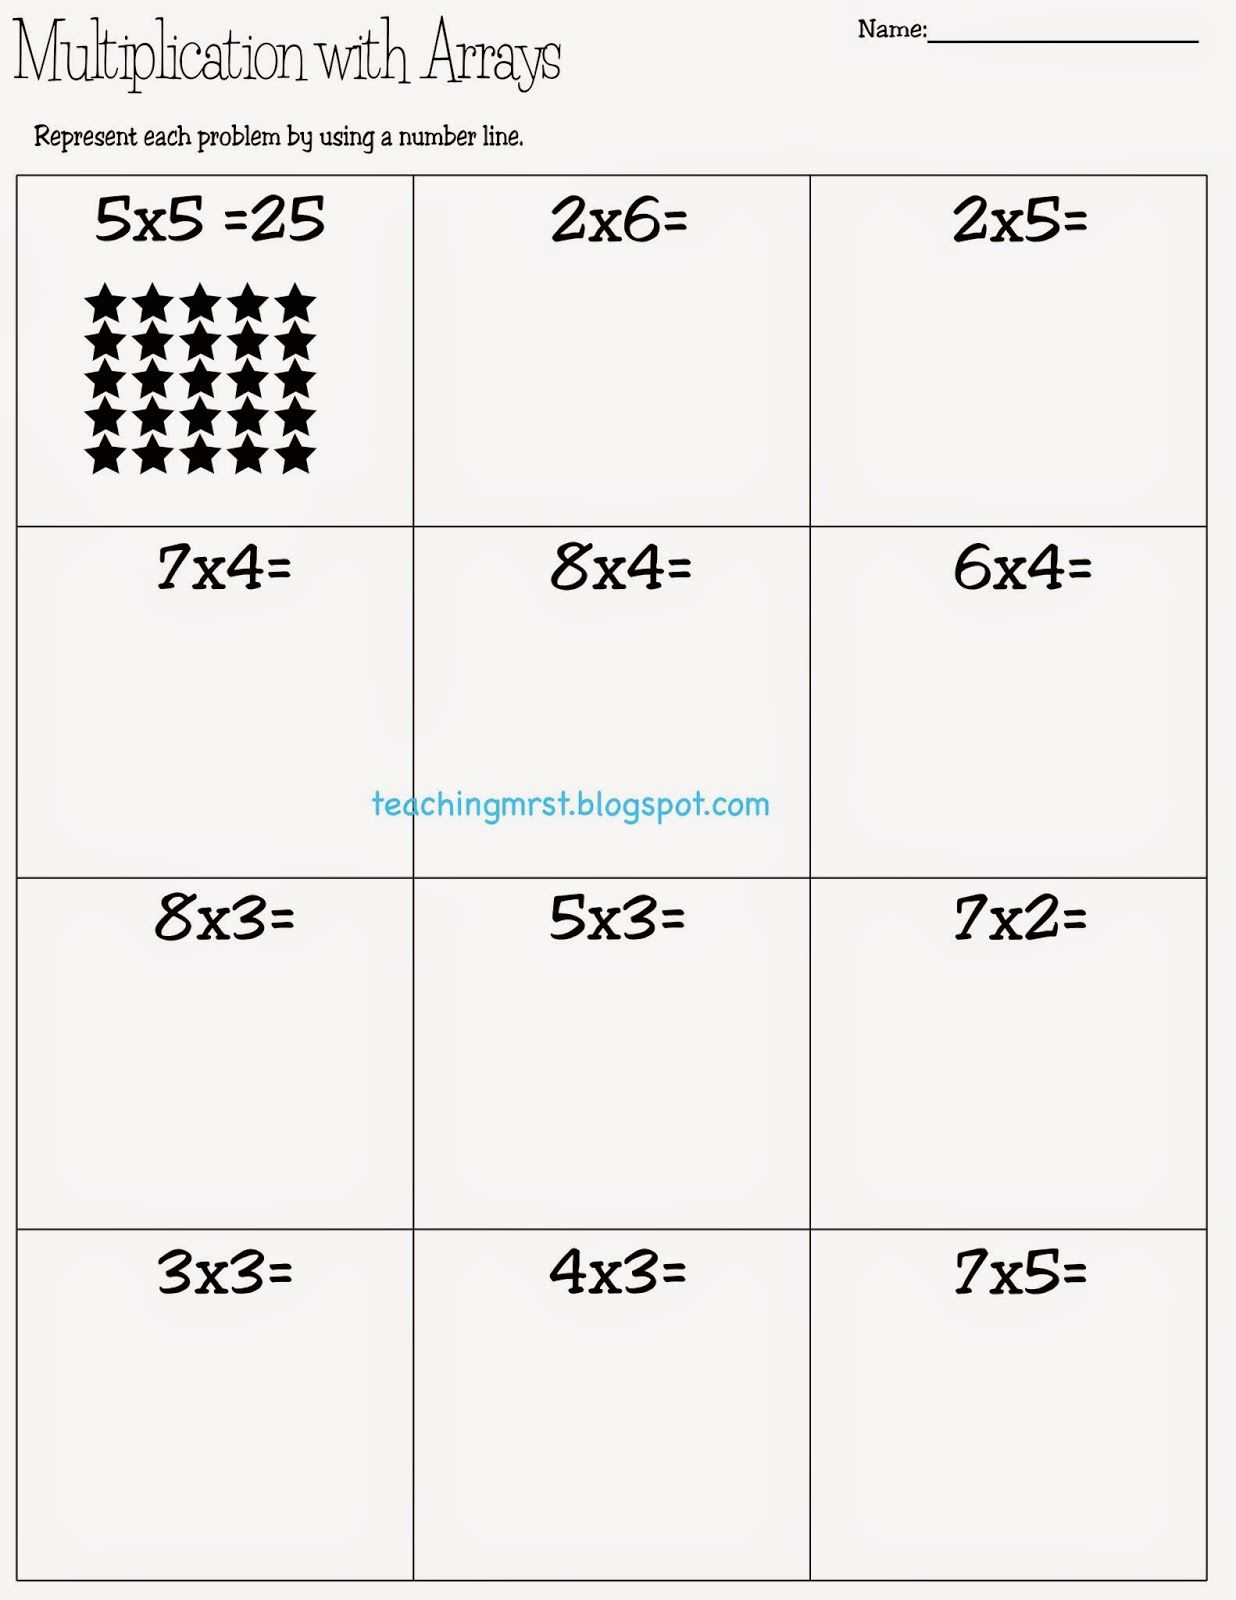 multiplication-word-problems-using-arrays-worksheets-free-printable